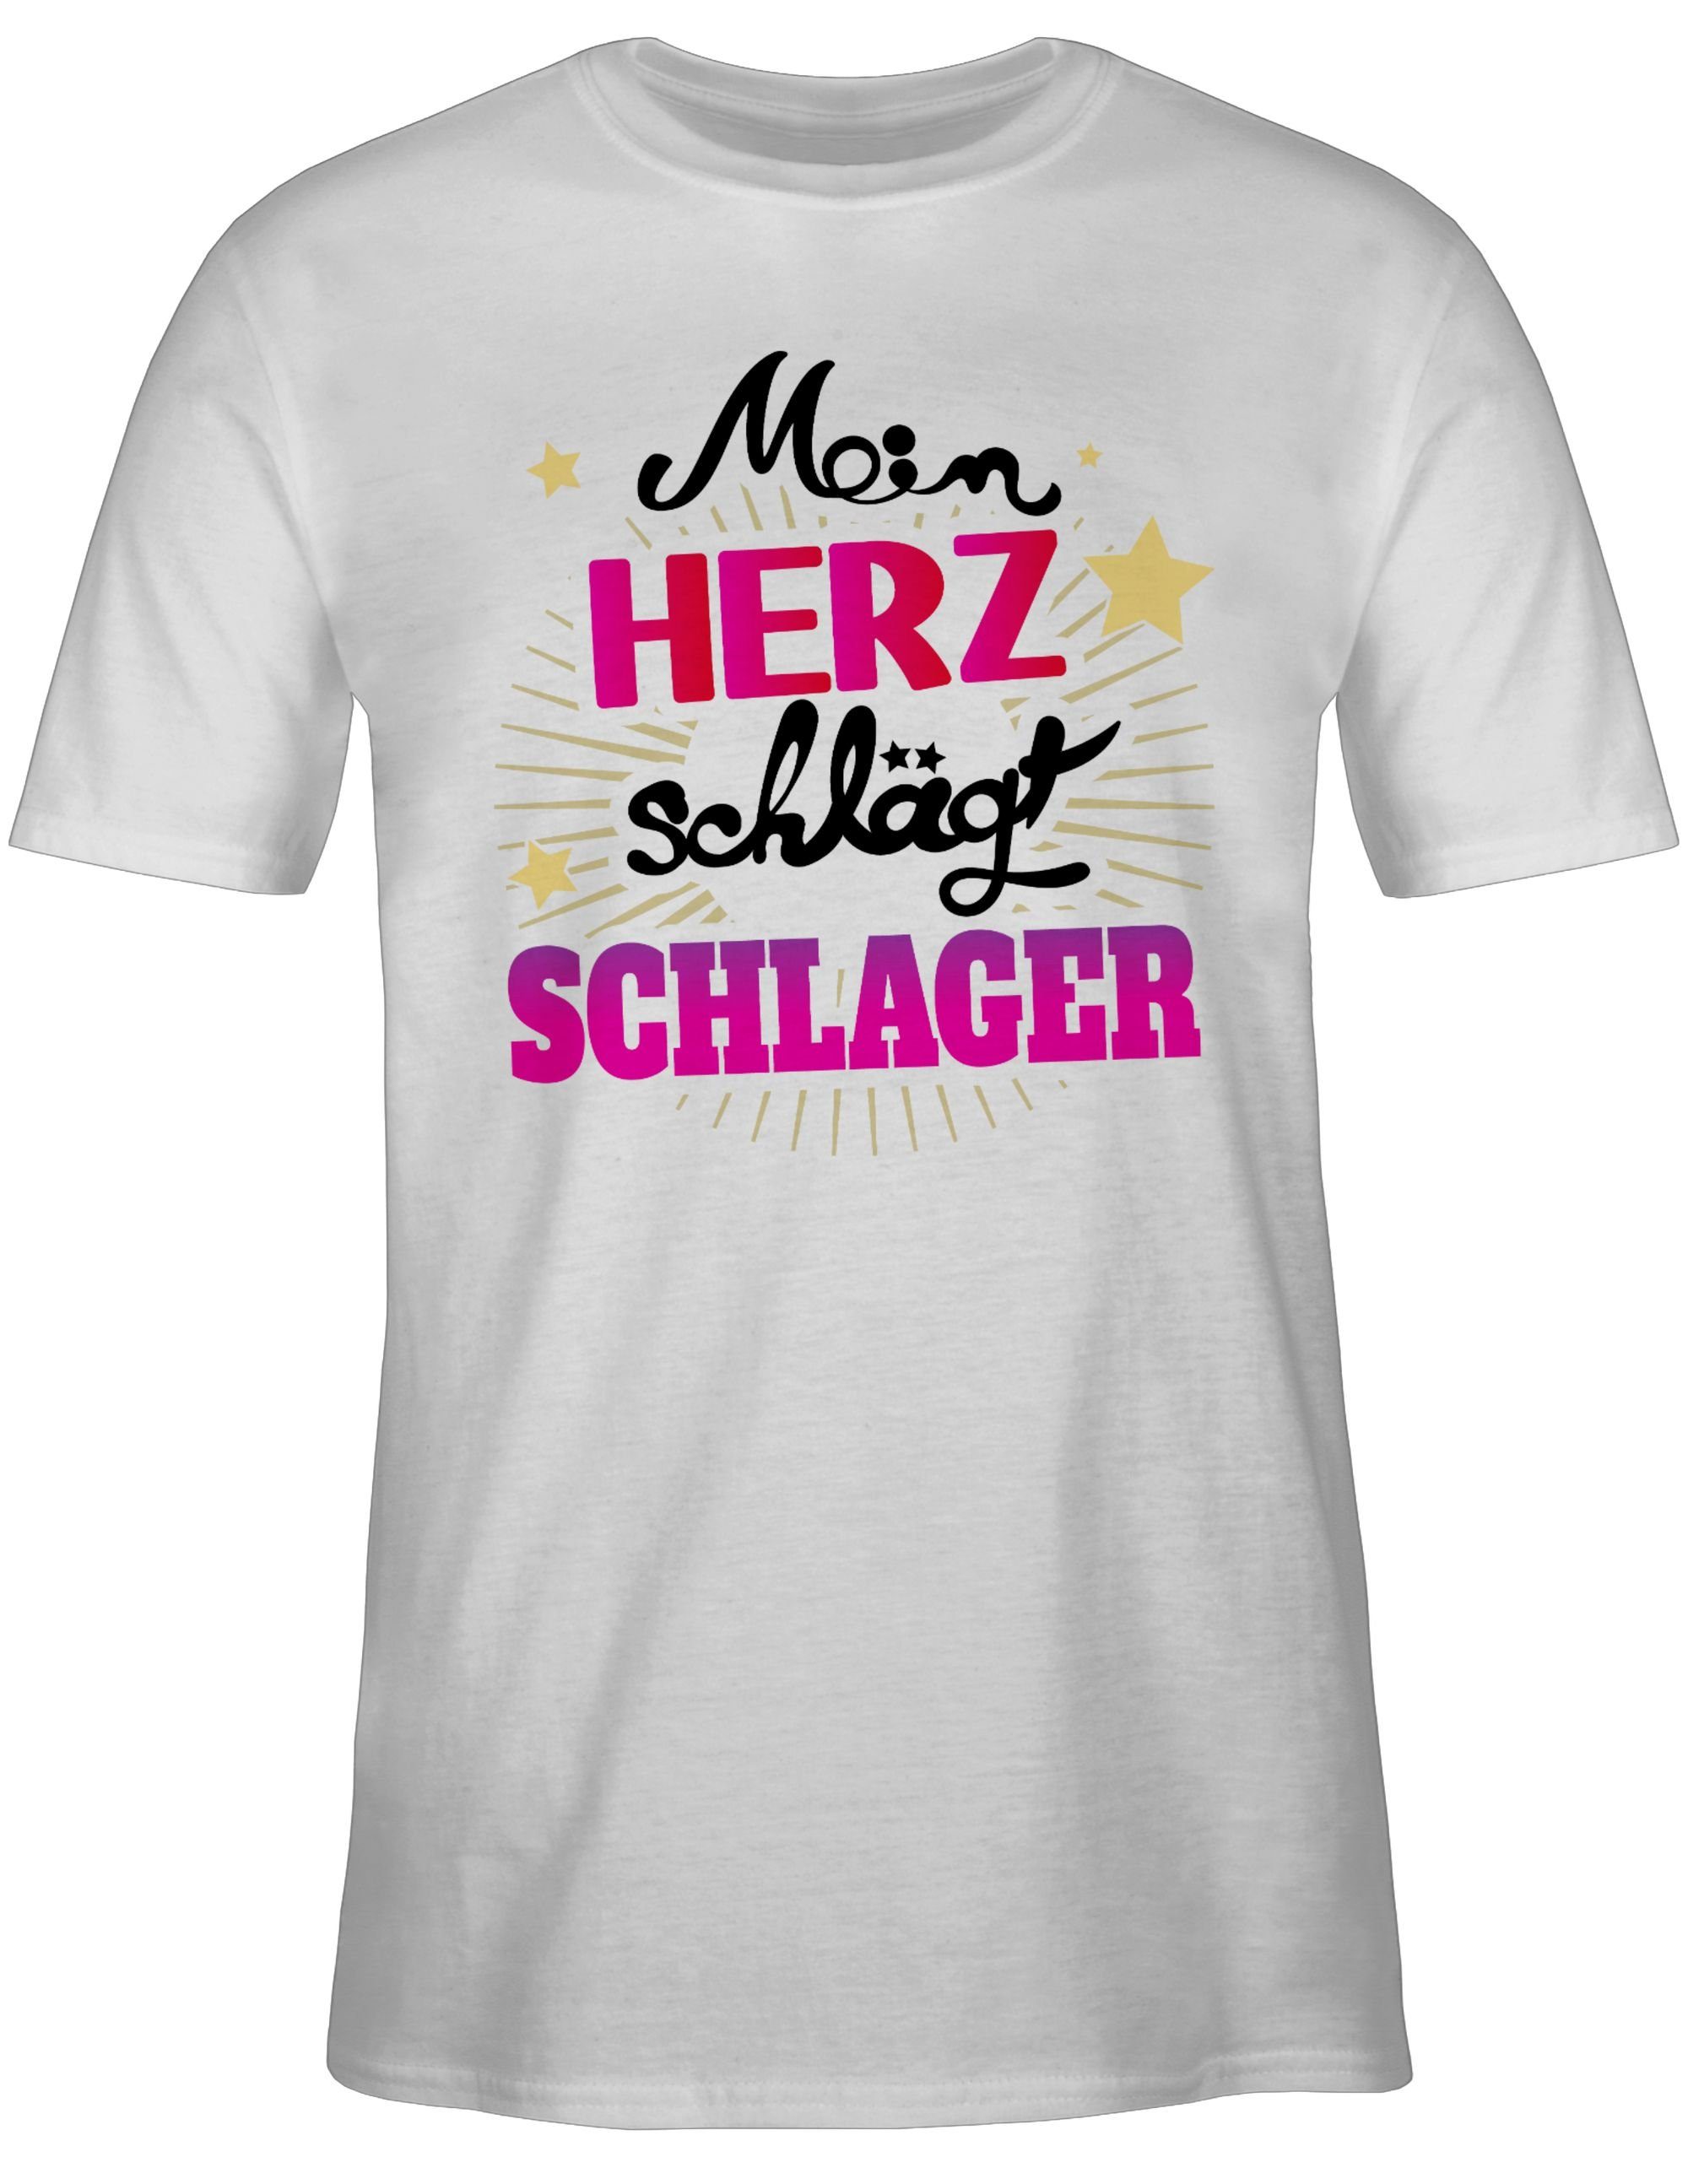 Outfit Herz Party Outfit Schlager Mein 1 Weiß Schlager Schlagerparty schlägt T-Shirt Shirtracer